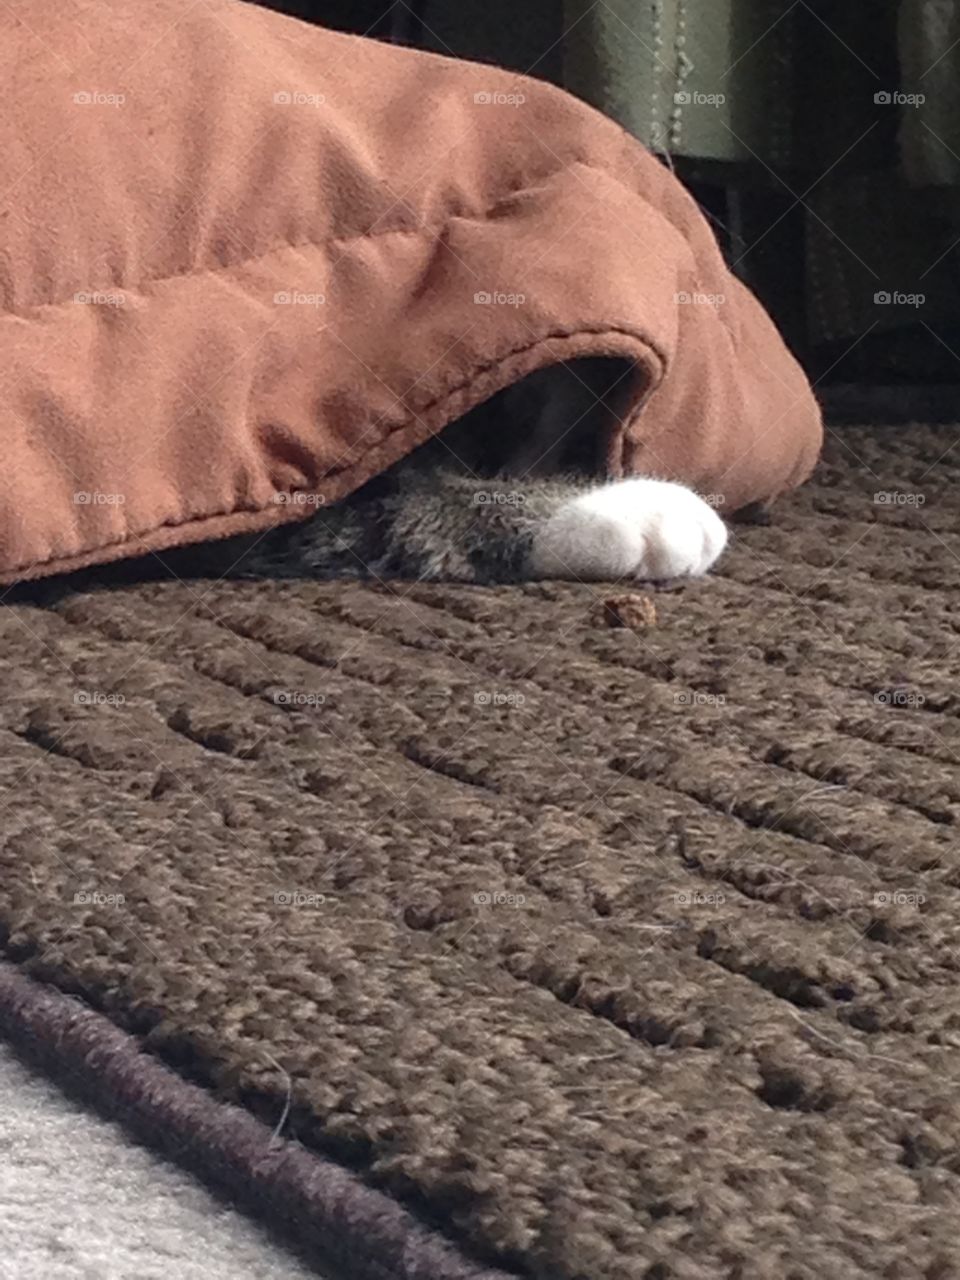 "I can't see you, you can't see me!"